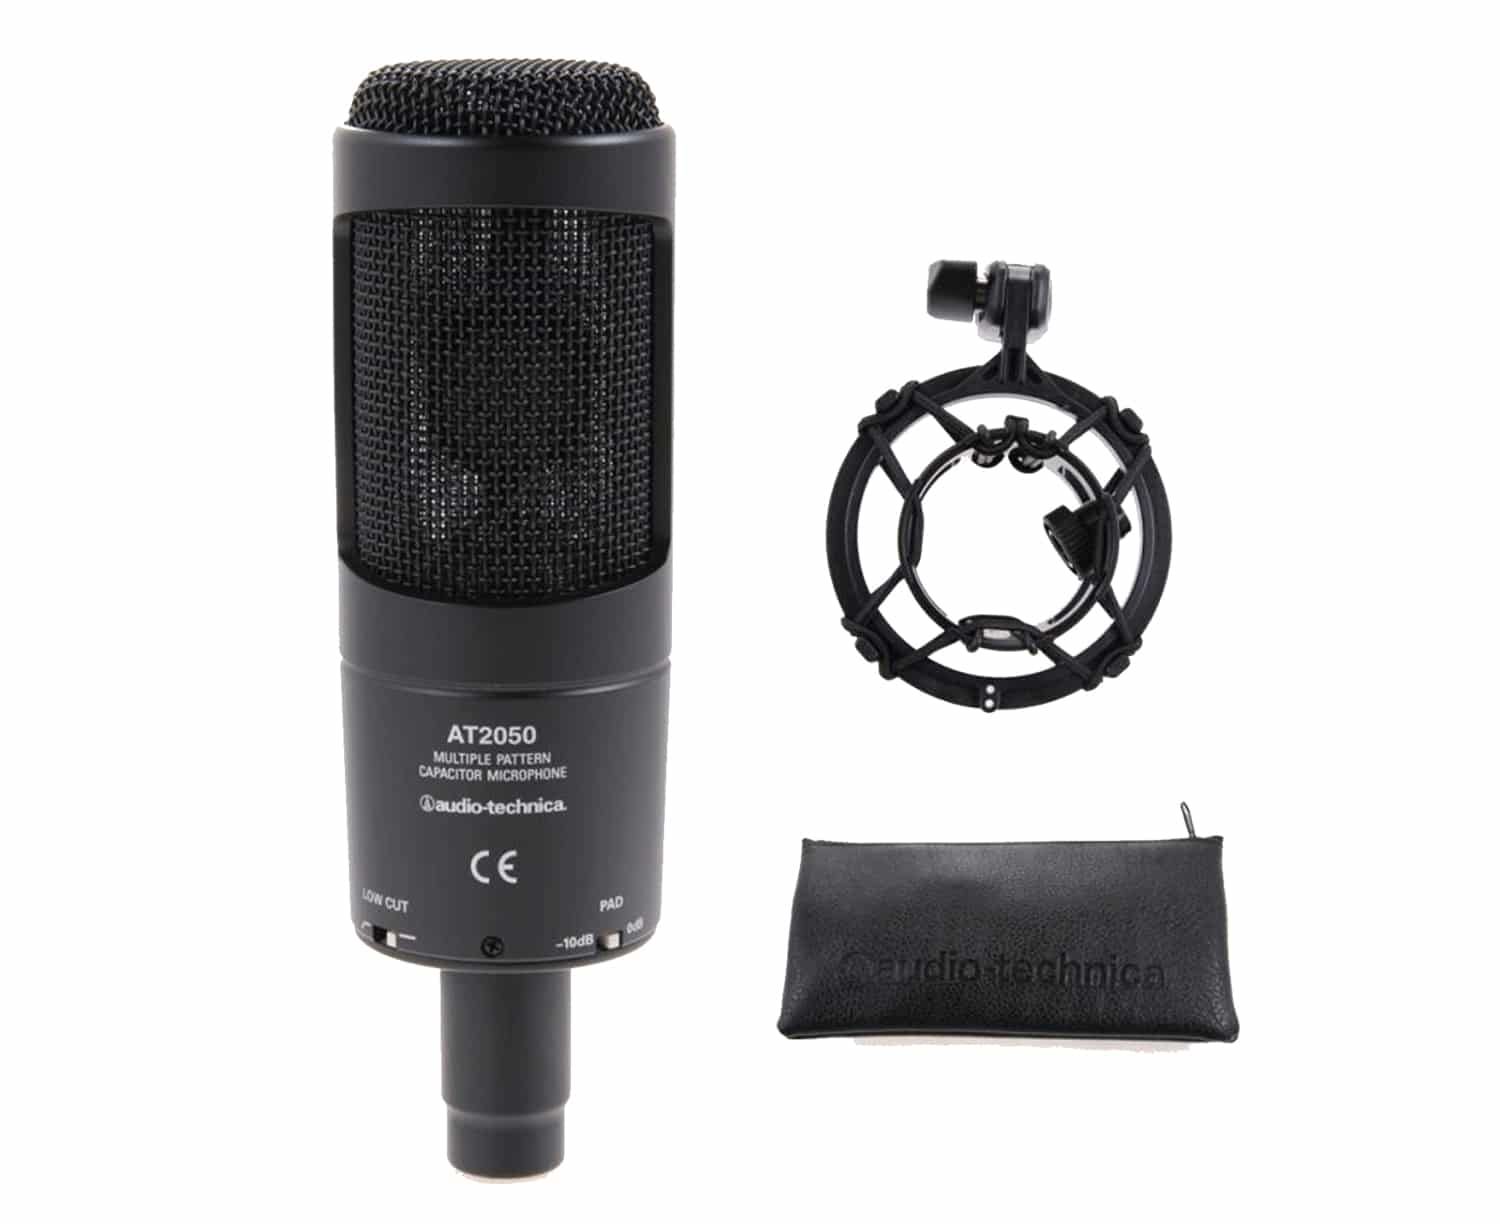 AT2050 Microphone is Ideal for Beginners